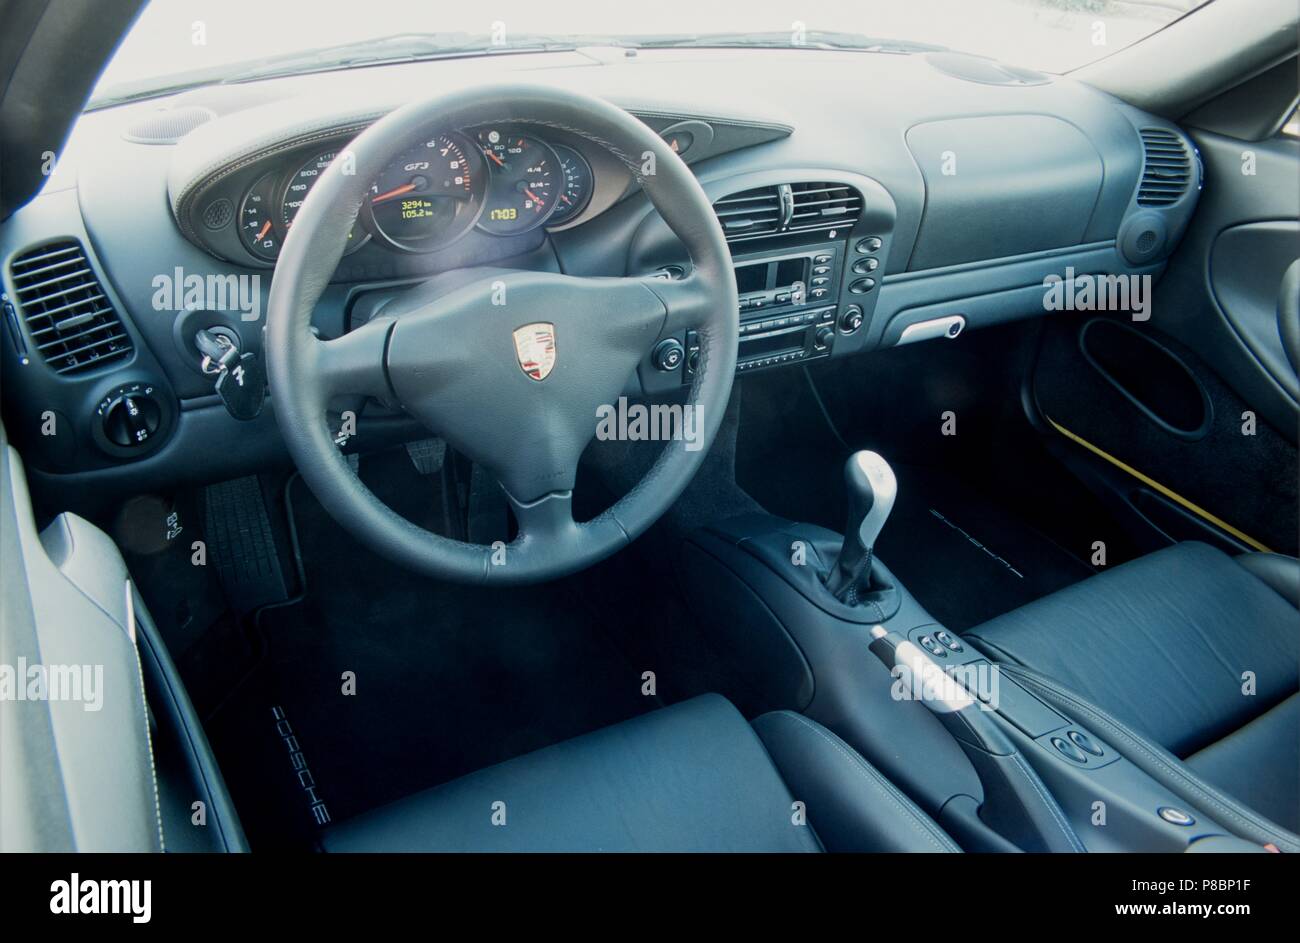 Porsche 911 GT3 RS - 996 model in yellow 2005 - showing drivers view of dashboard LHD Stock Photo